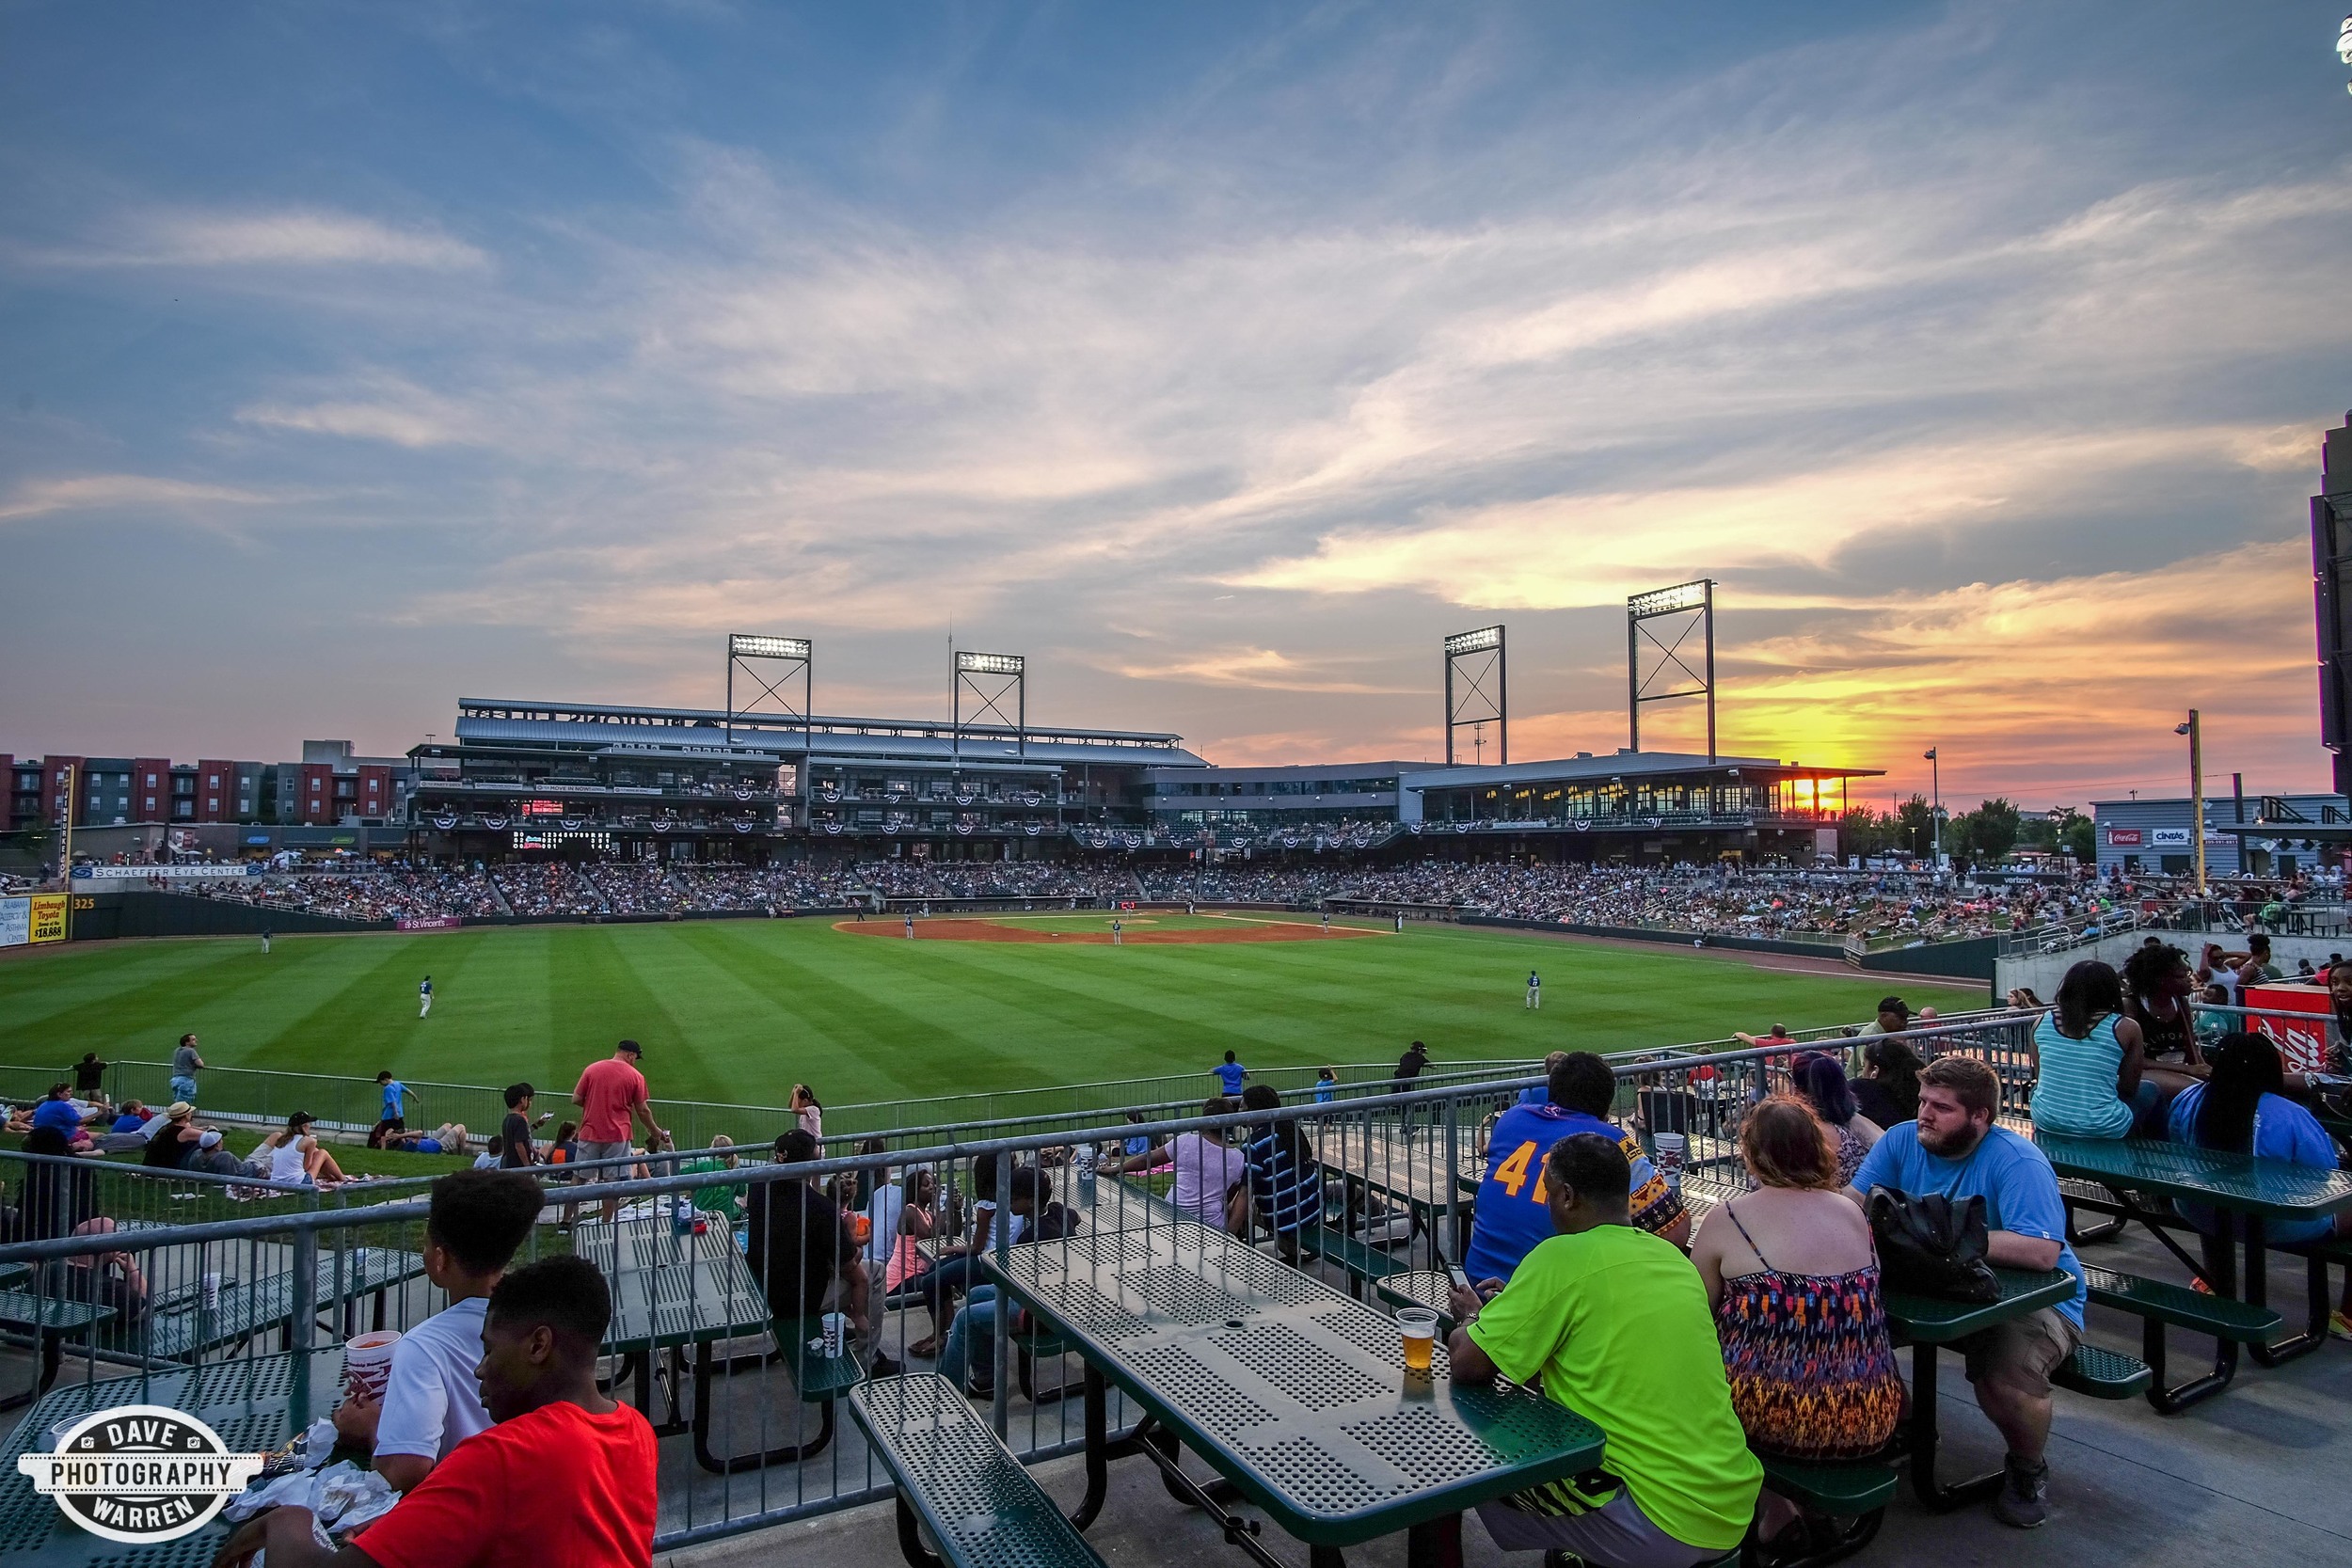 Sunset over the Birmingham Barons Game at Region's Park